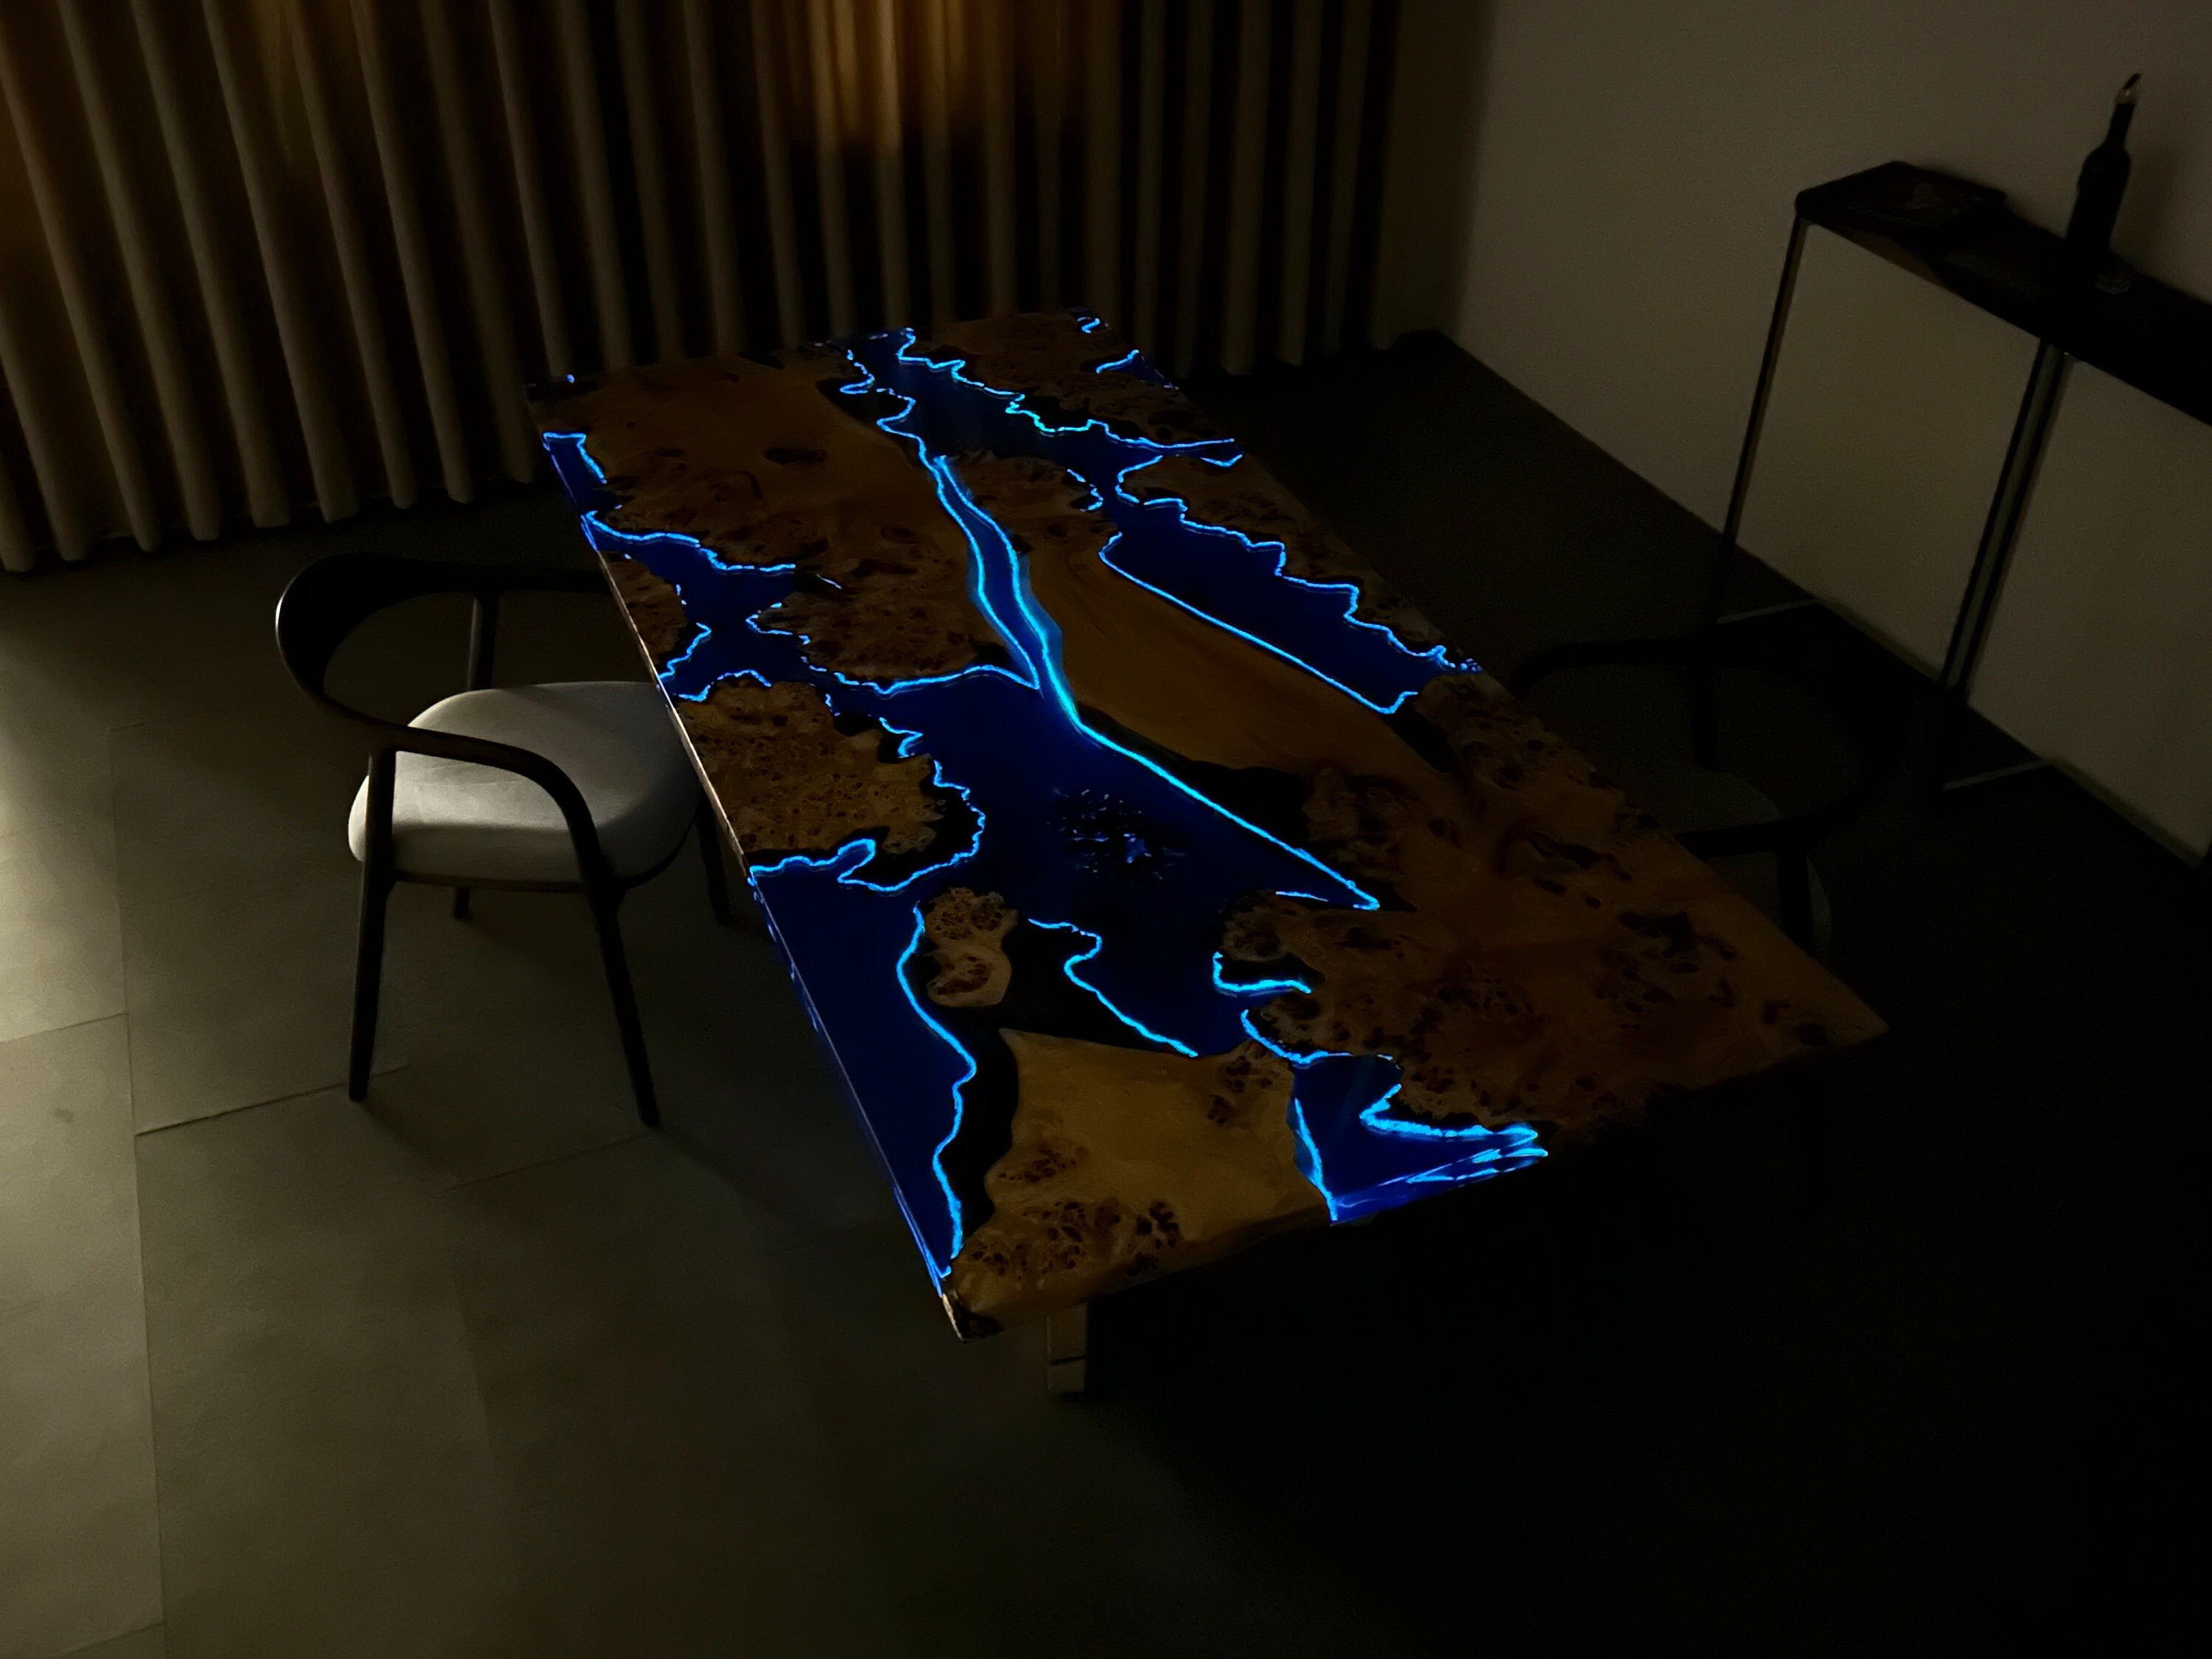 Epoxy Resin Table With Light, Epoxy Resin Art Table With Glowing